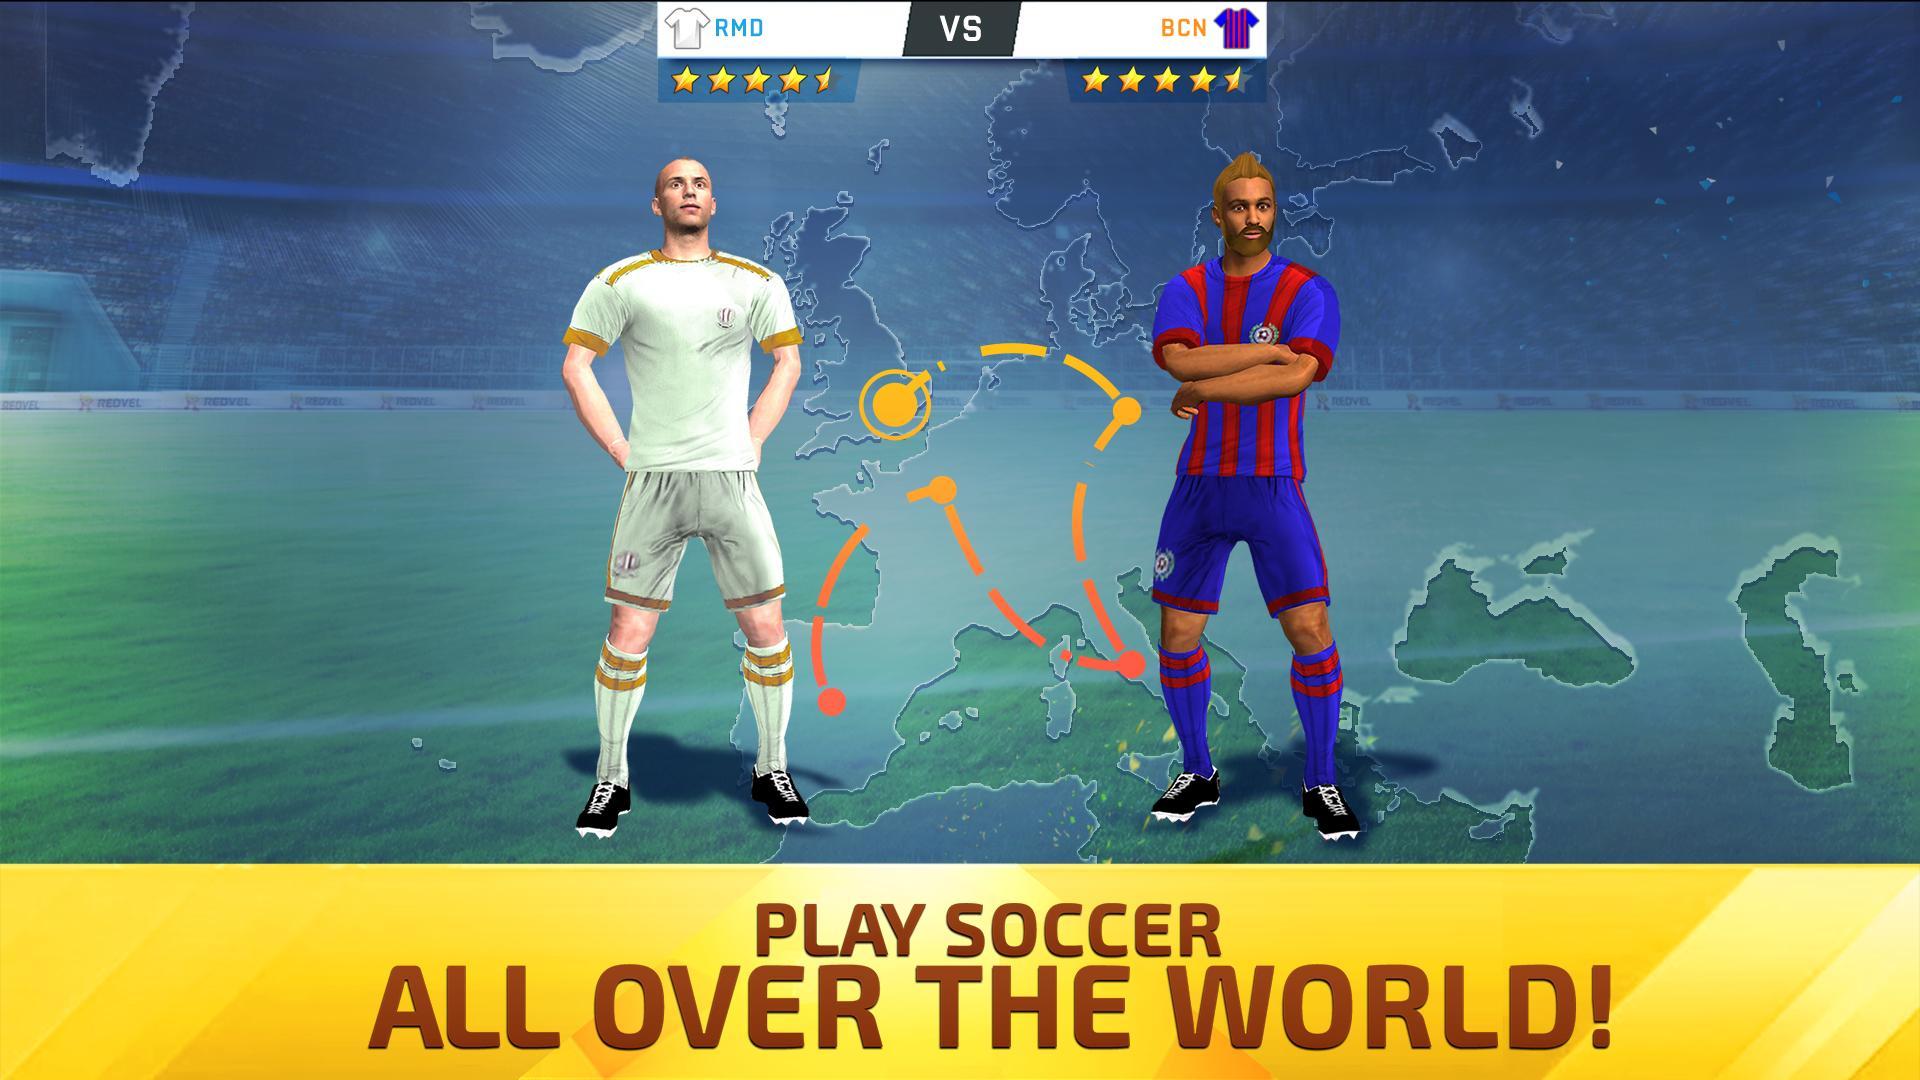 Soccer Star 2020 Top Leagues: Play the SOCCER game 2.4.0 Screenshot 3